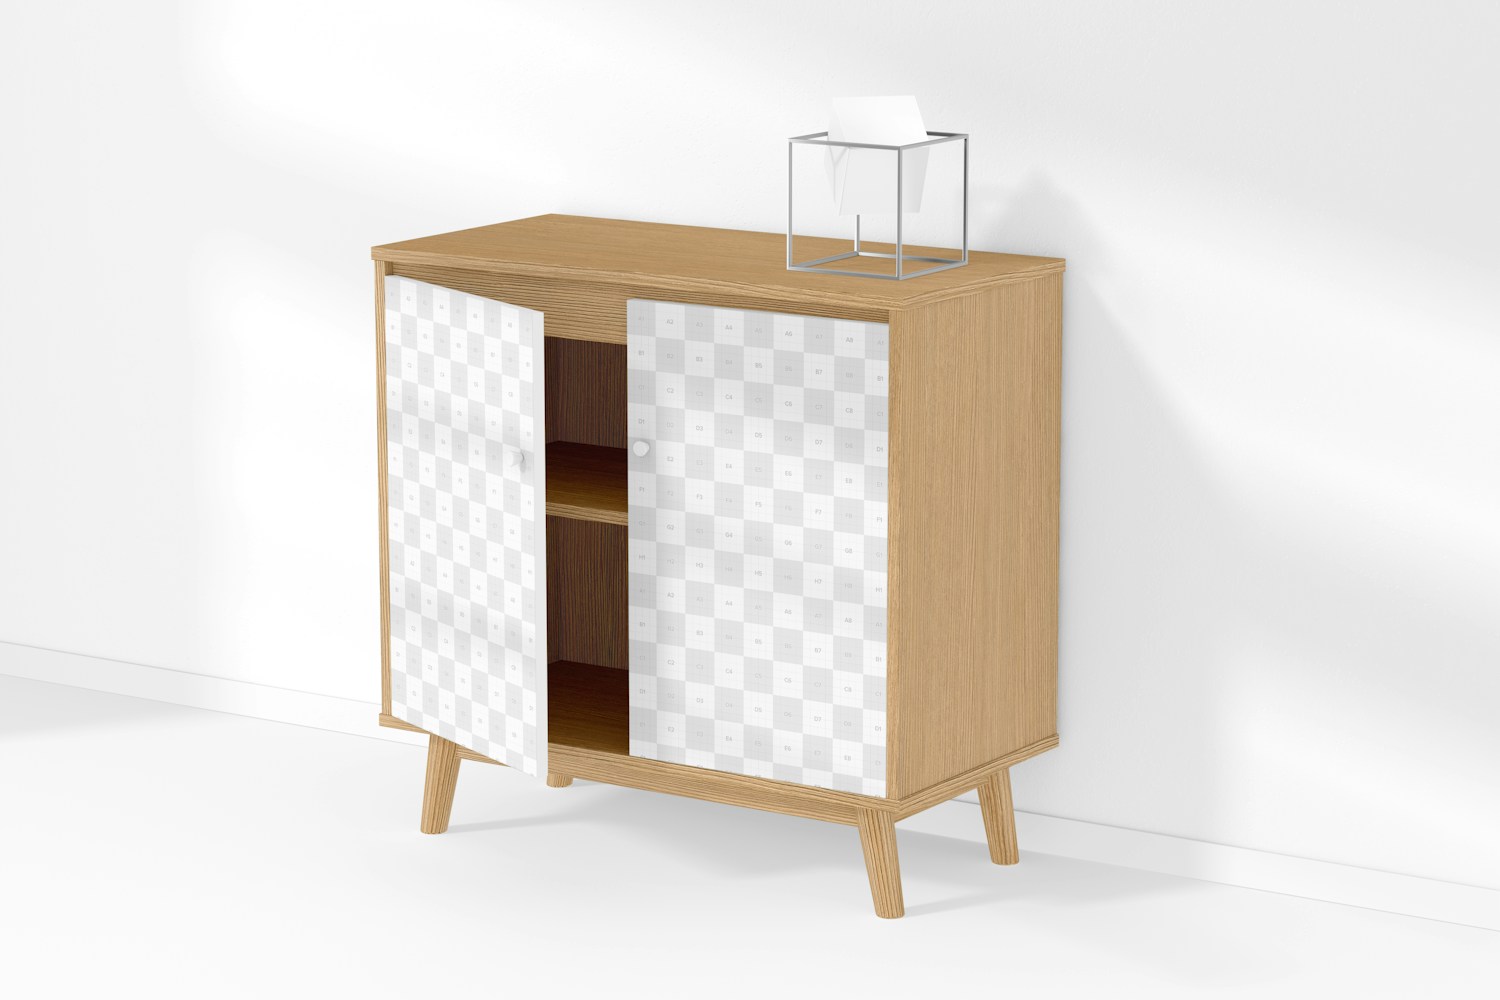 Two Door Cabinet Mockup, with Decorative Cube